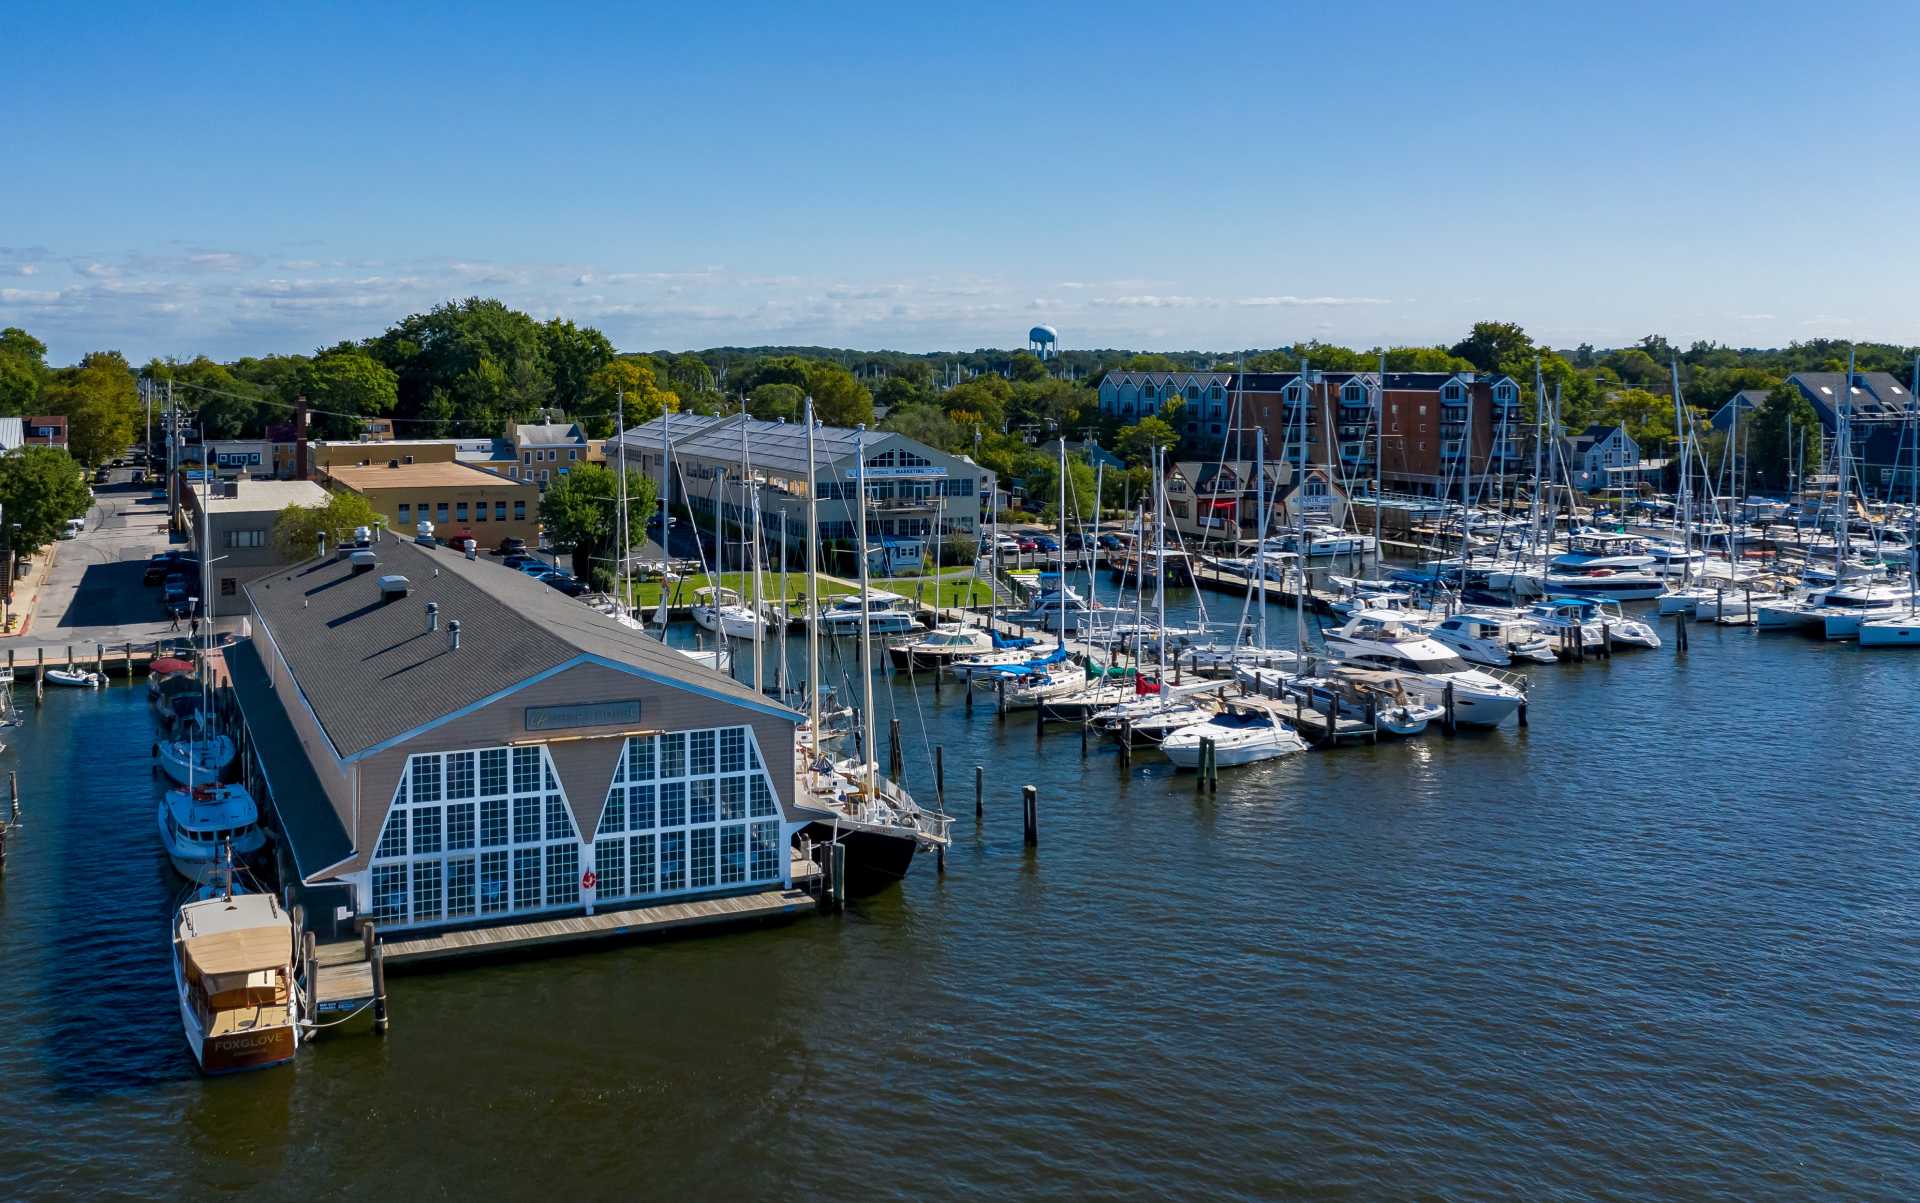 A lovely summer day at 222 Severn office complex and marina, waterfront property on Spa Creek across from Annapolis, Maryland.